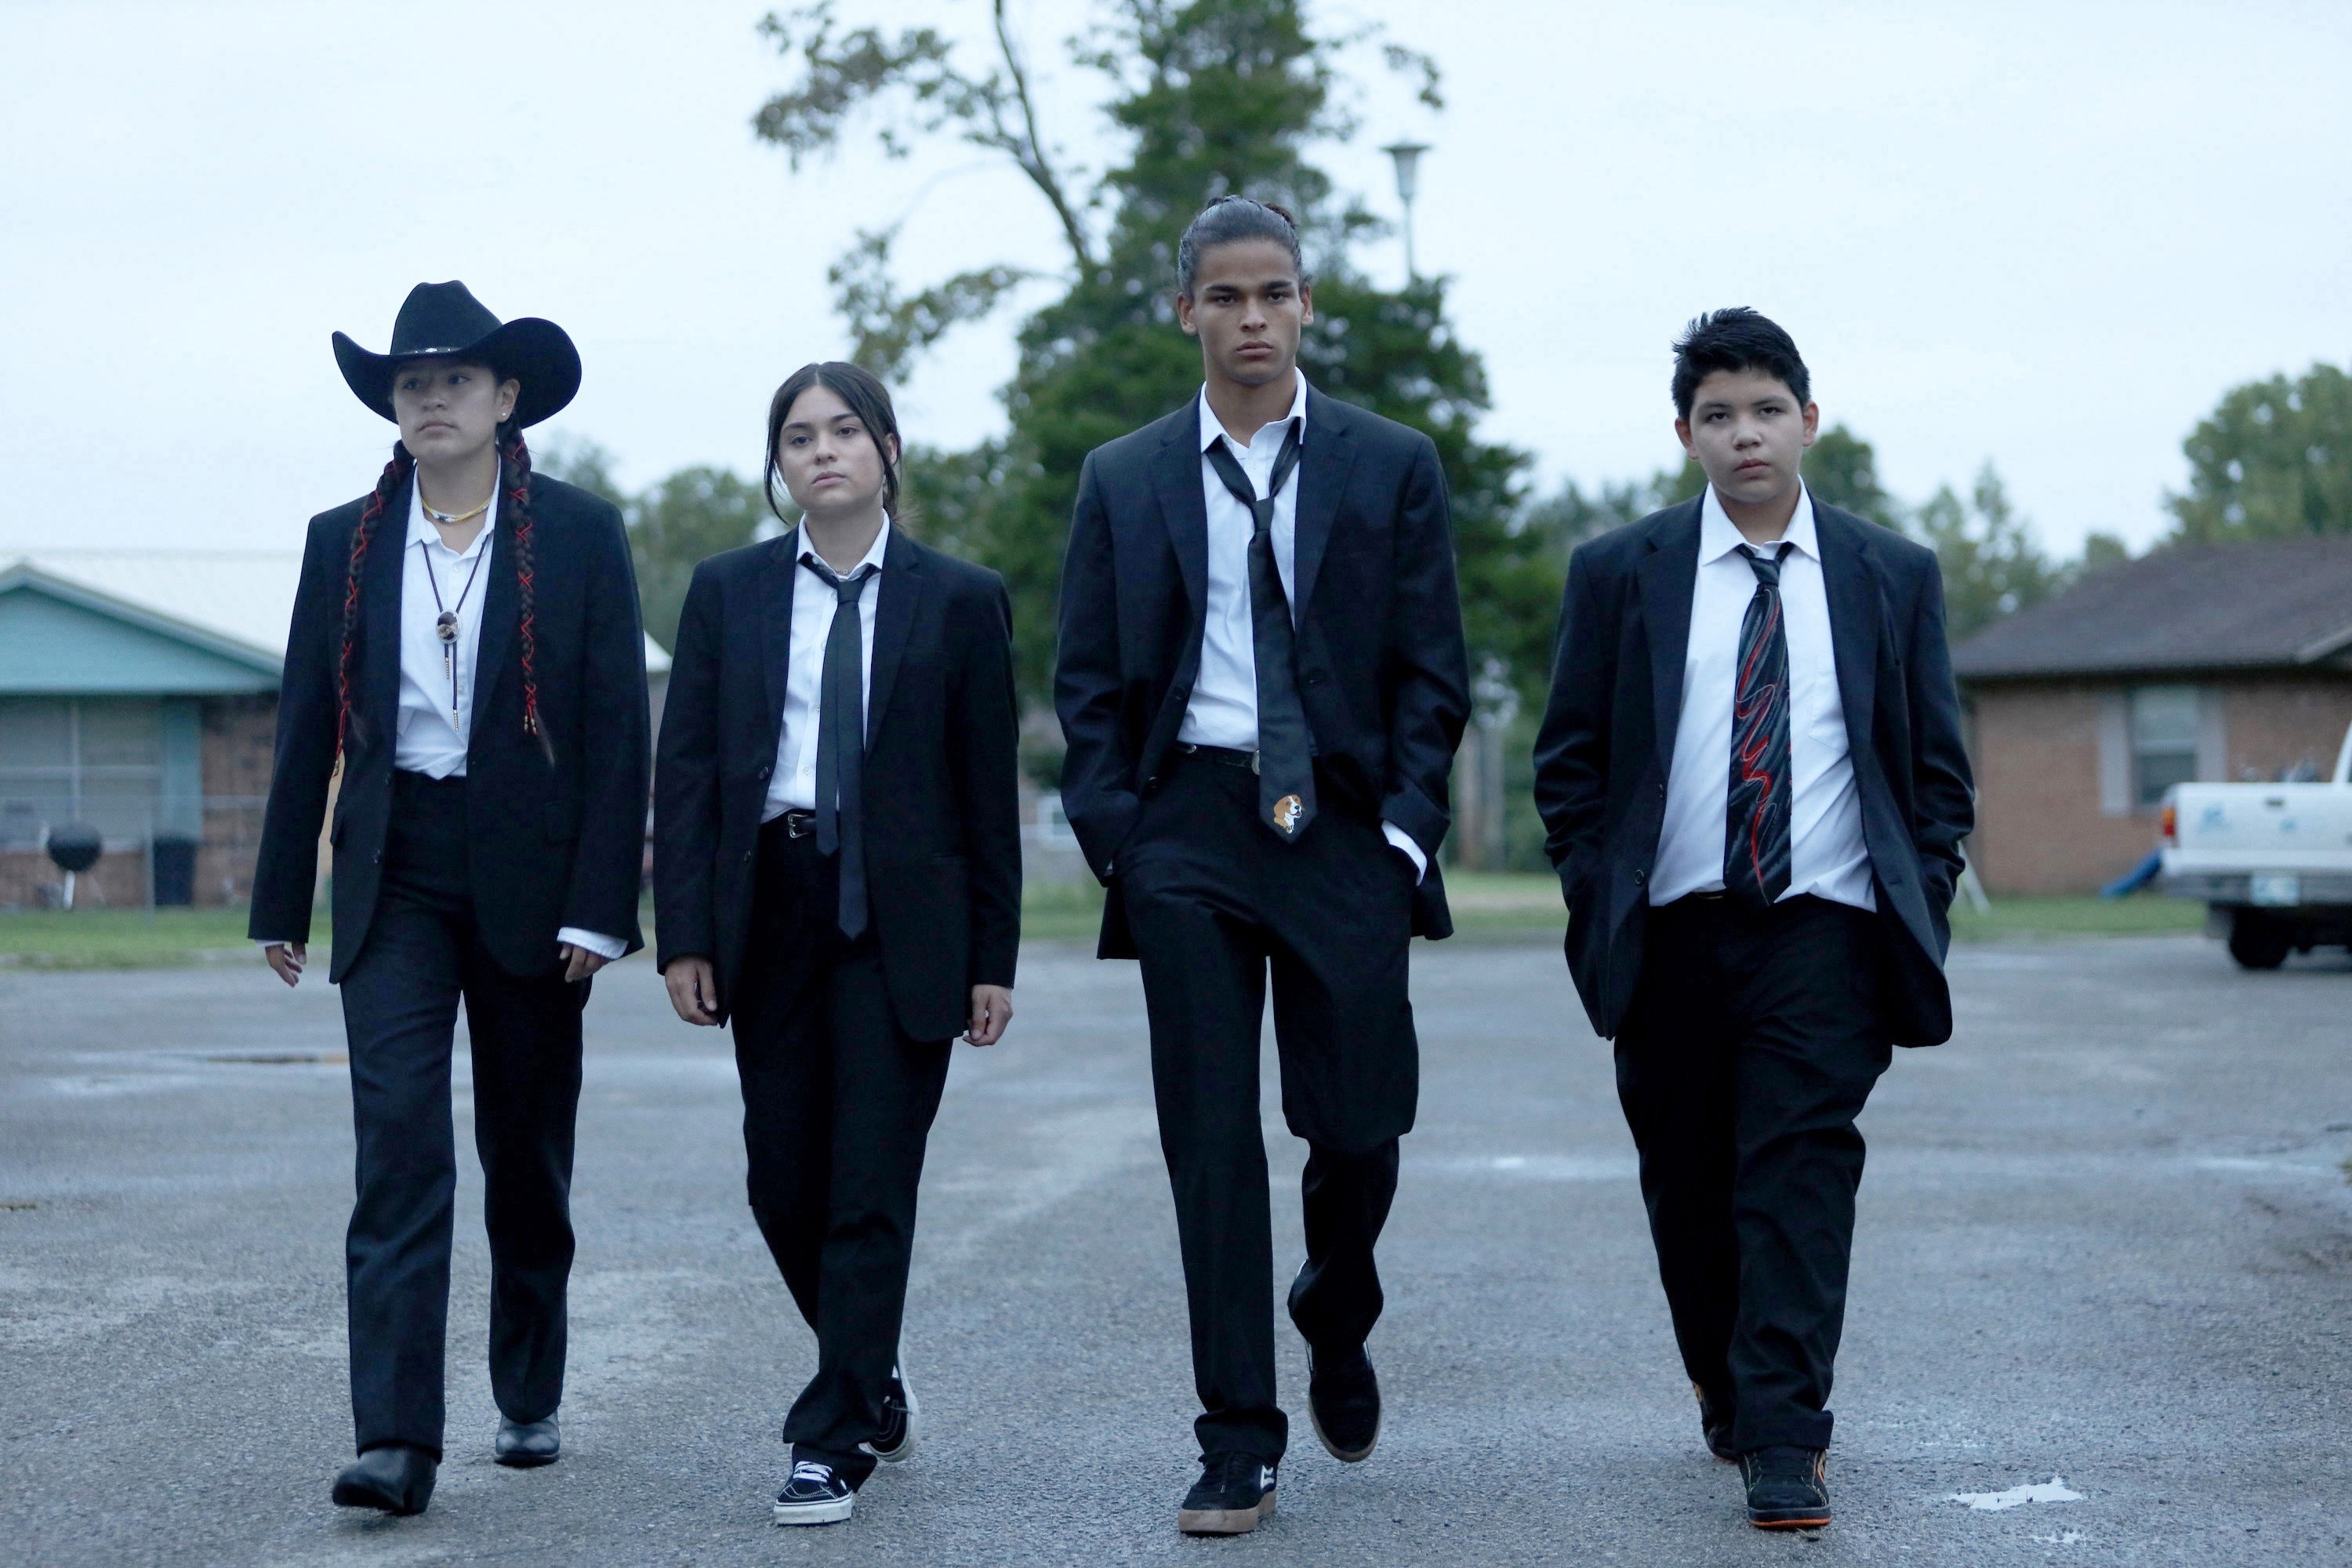 the main cast walking in suits and ties across a parking lot